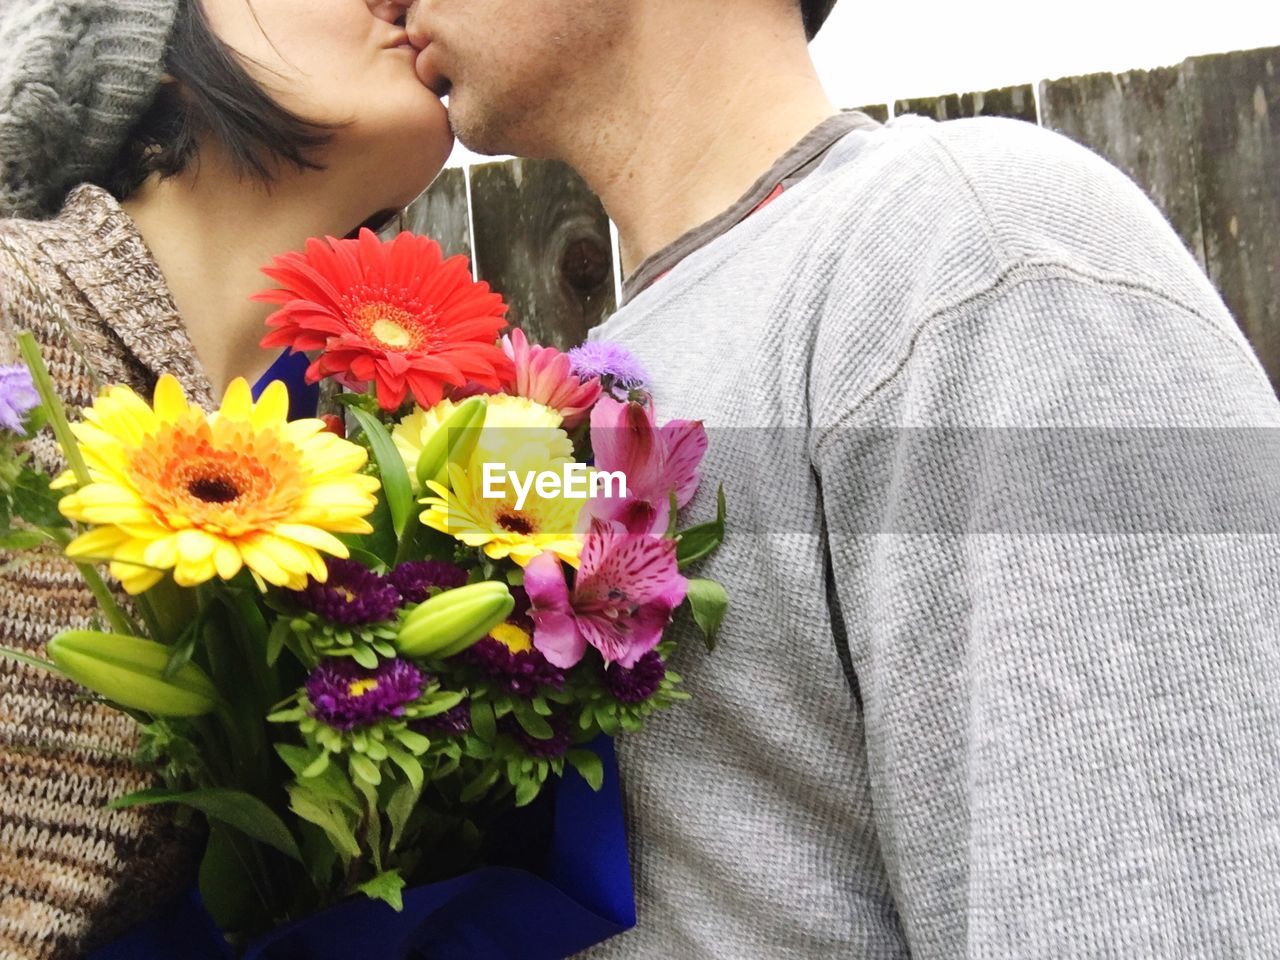 Couple kissing while holding flower bouquet